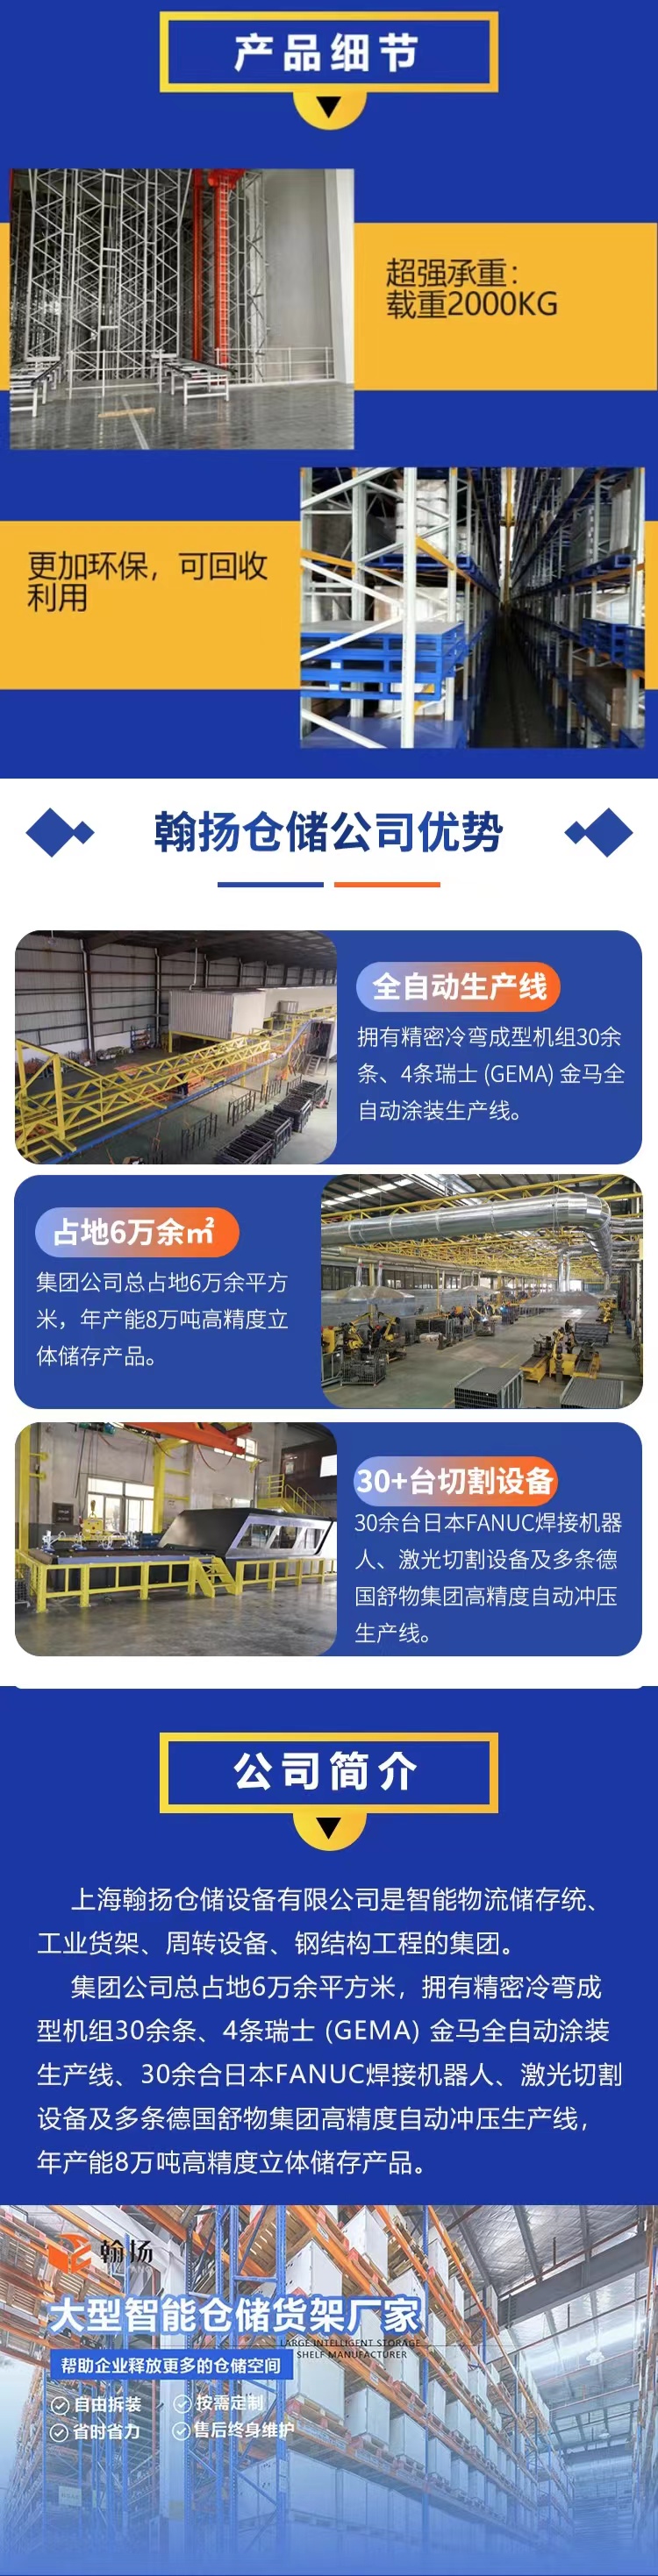 Cold storage shuttle car automated three-dimensional warehouse cold chain low-temperature freezing rack intensive storage rack